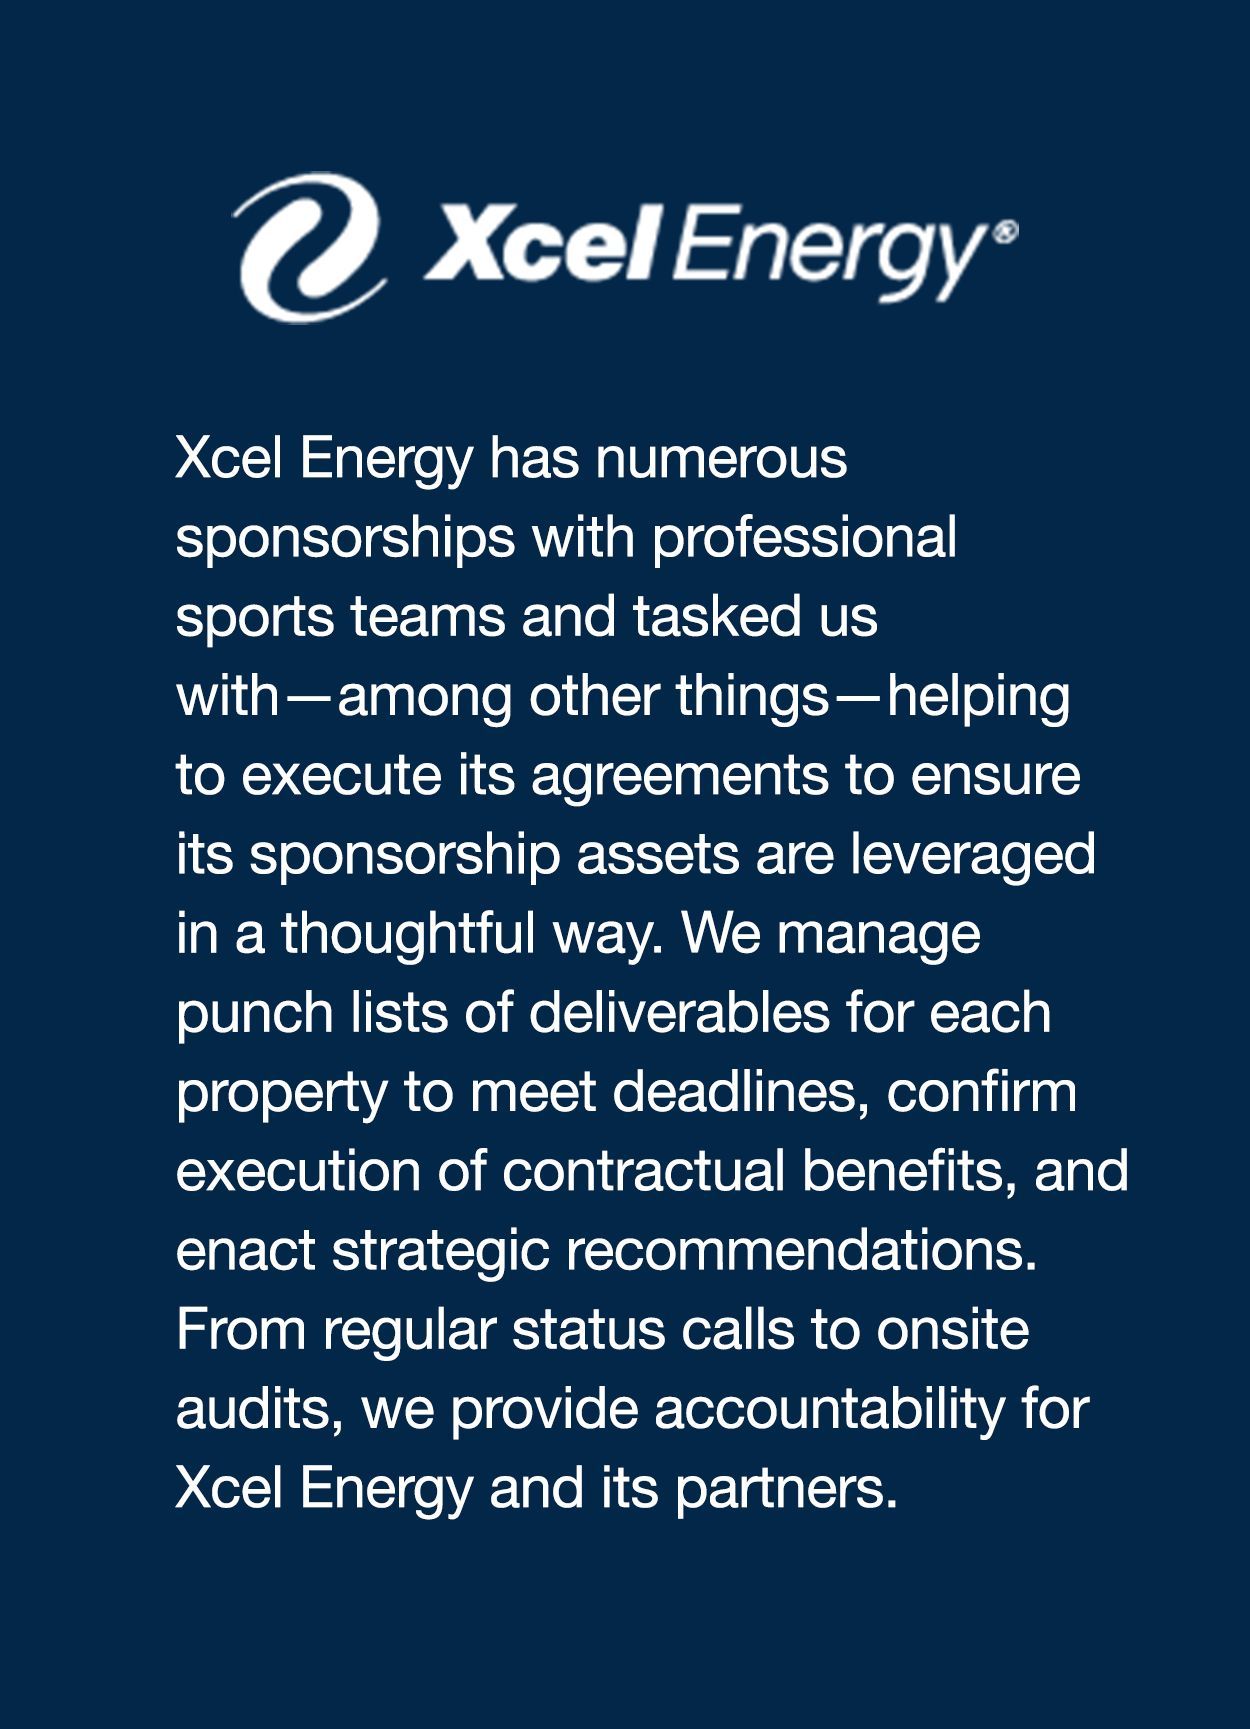 Xcel Energy has numerous sponsorships with professional sports teams and tasked us with—among other things—helping to execute its agreements to ensure its sponsorship assets are leveraged in a thoughtful way. We manage punch lists of deliverables for each property to meet deadlines, confirm execution of contractual benefits, and enact strategic recommendations. From regular status calls to onsite audits, we provide accountability for Xcel Energy and its partners.